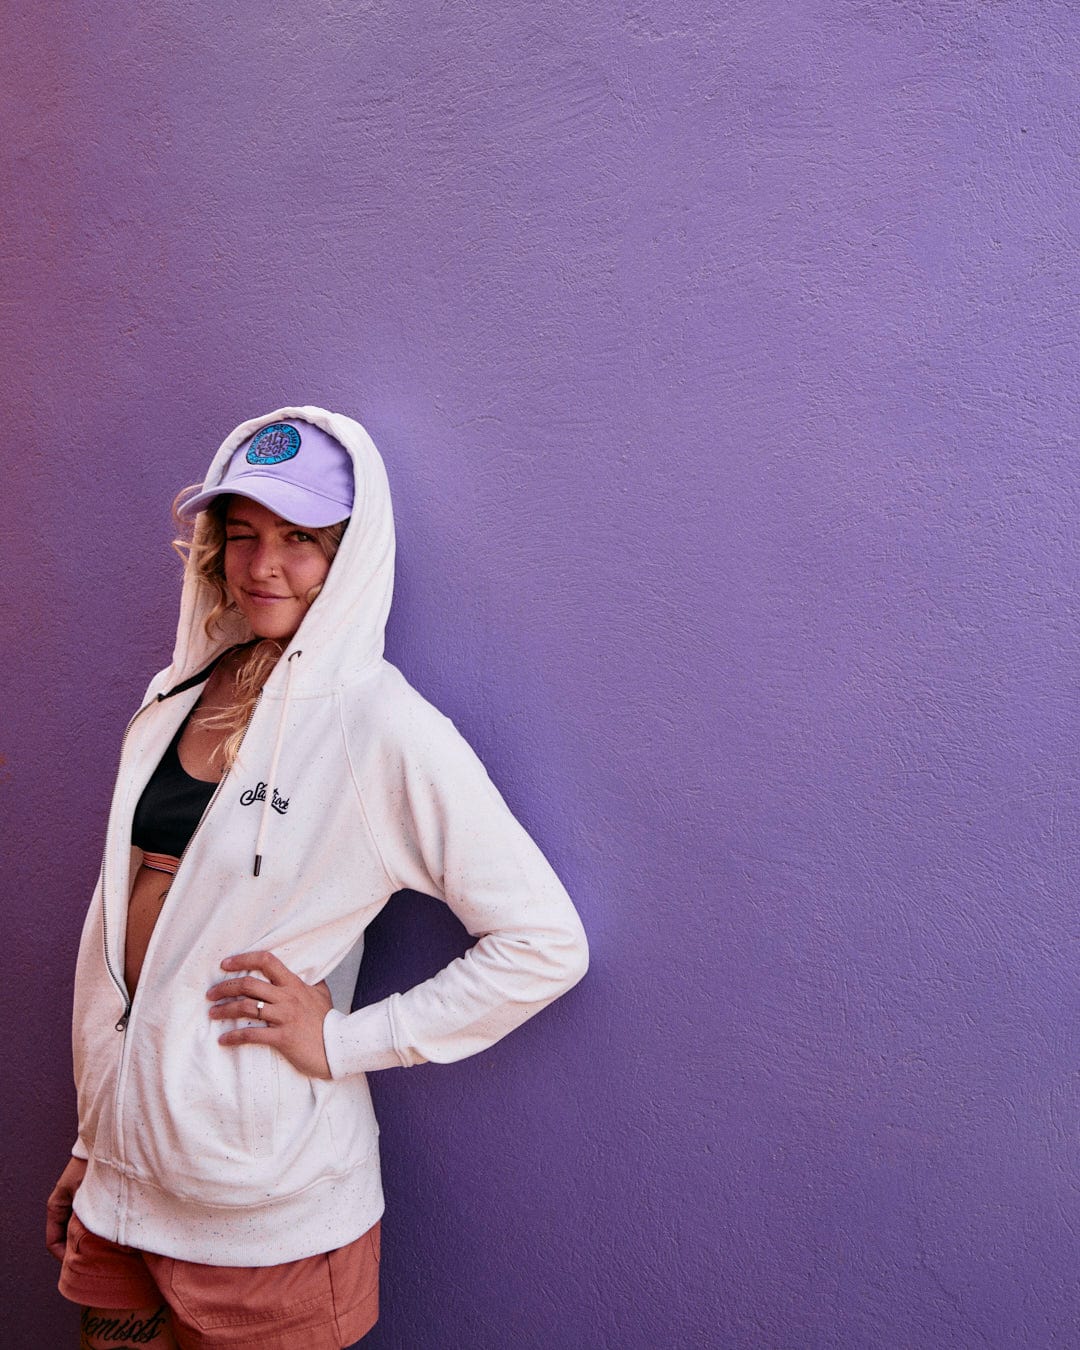 Woman in a Ginny - Womens Zip Hoodie in Cream by Saltrock and pink shorts crafted from peached soft hand feel fabric, standing against a purple wall, smiling with hood over her head.